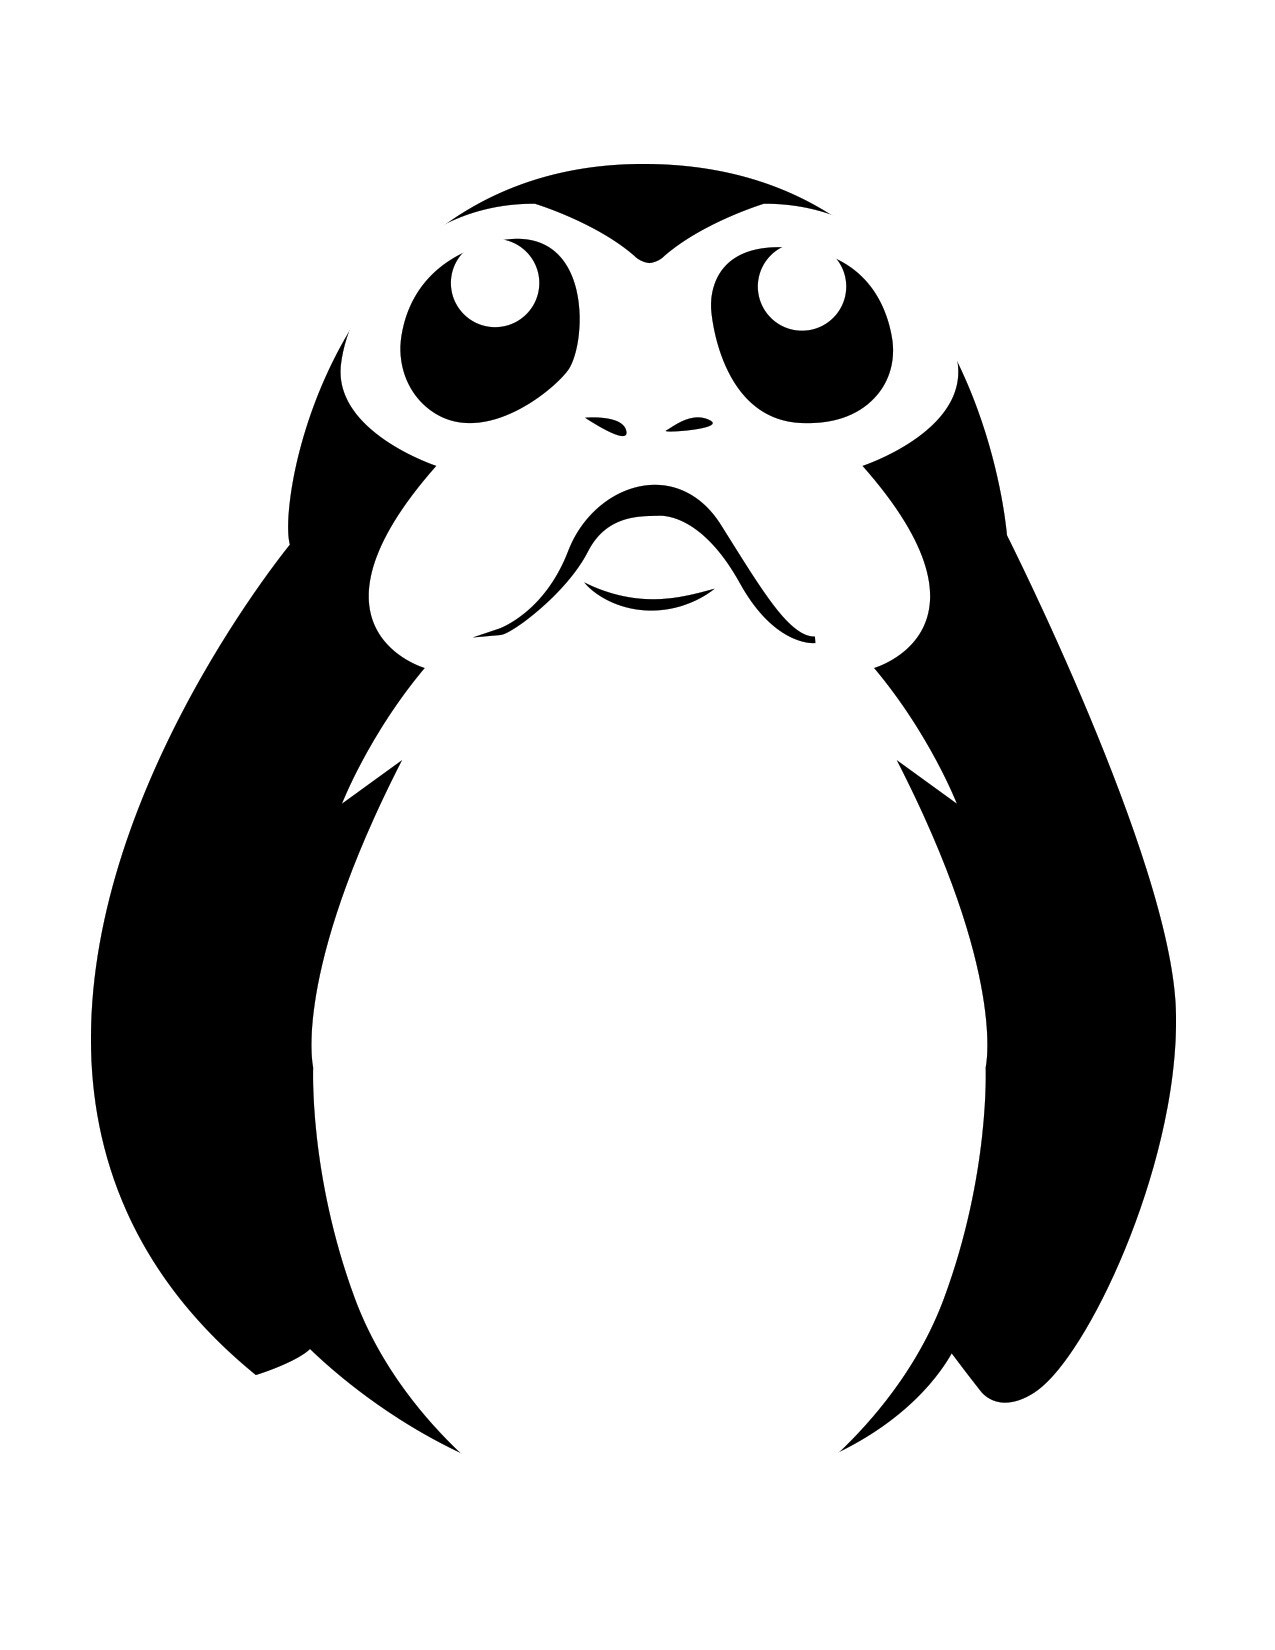 A porg depicted in a minimalist black-and-white graphic style.